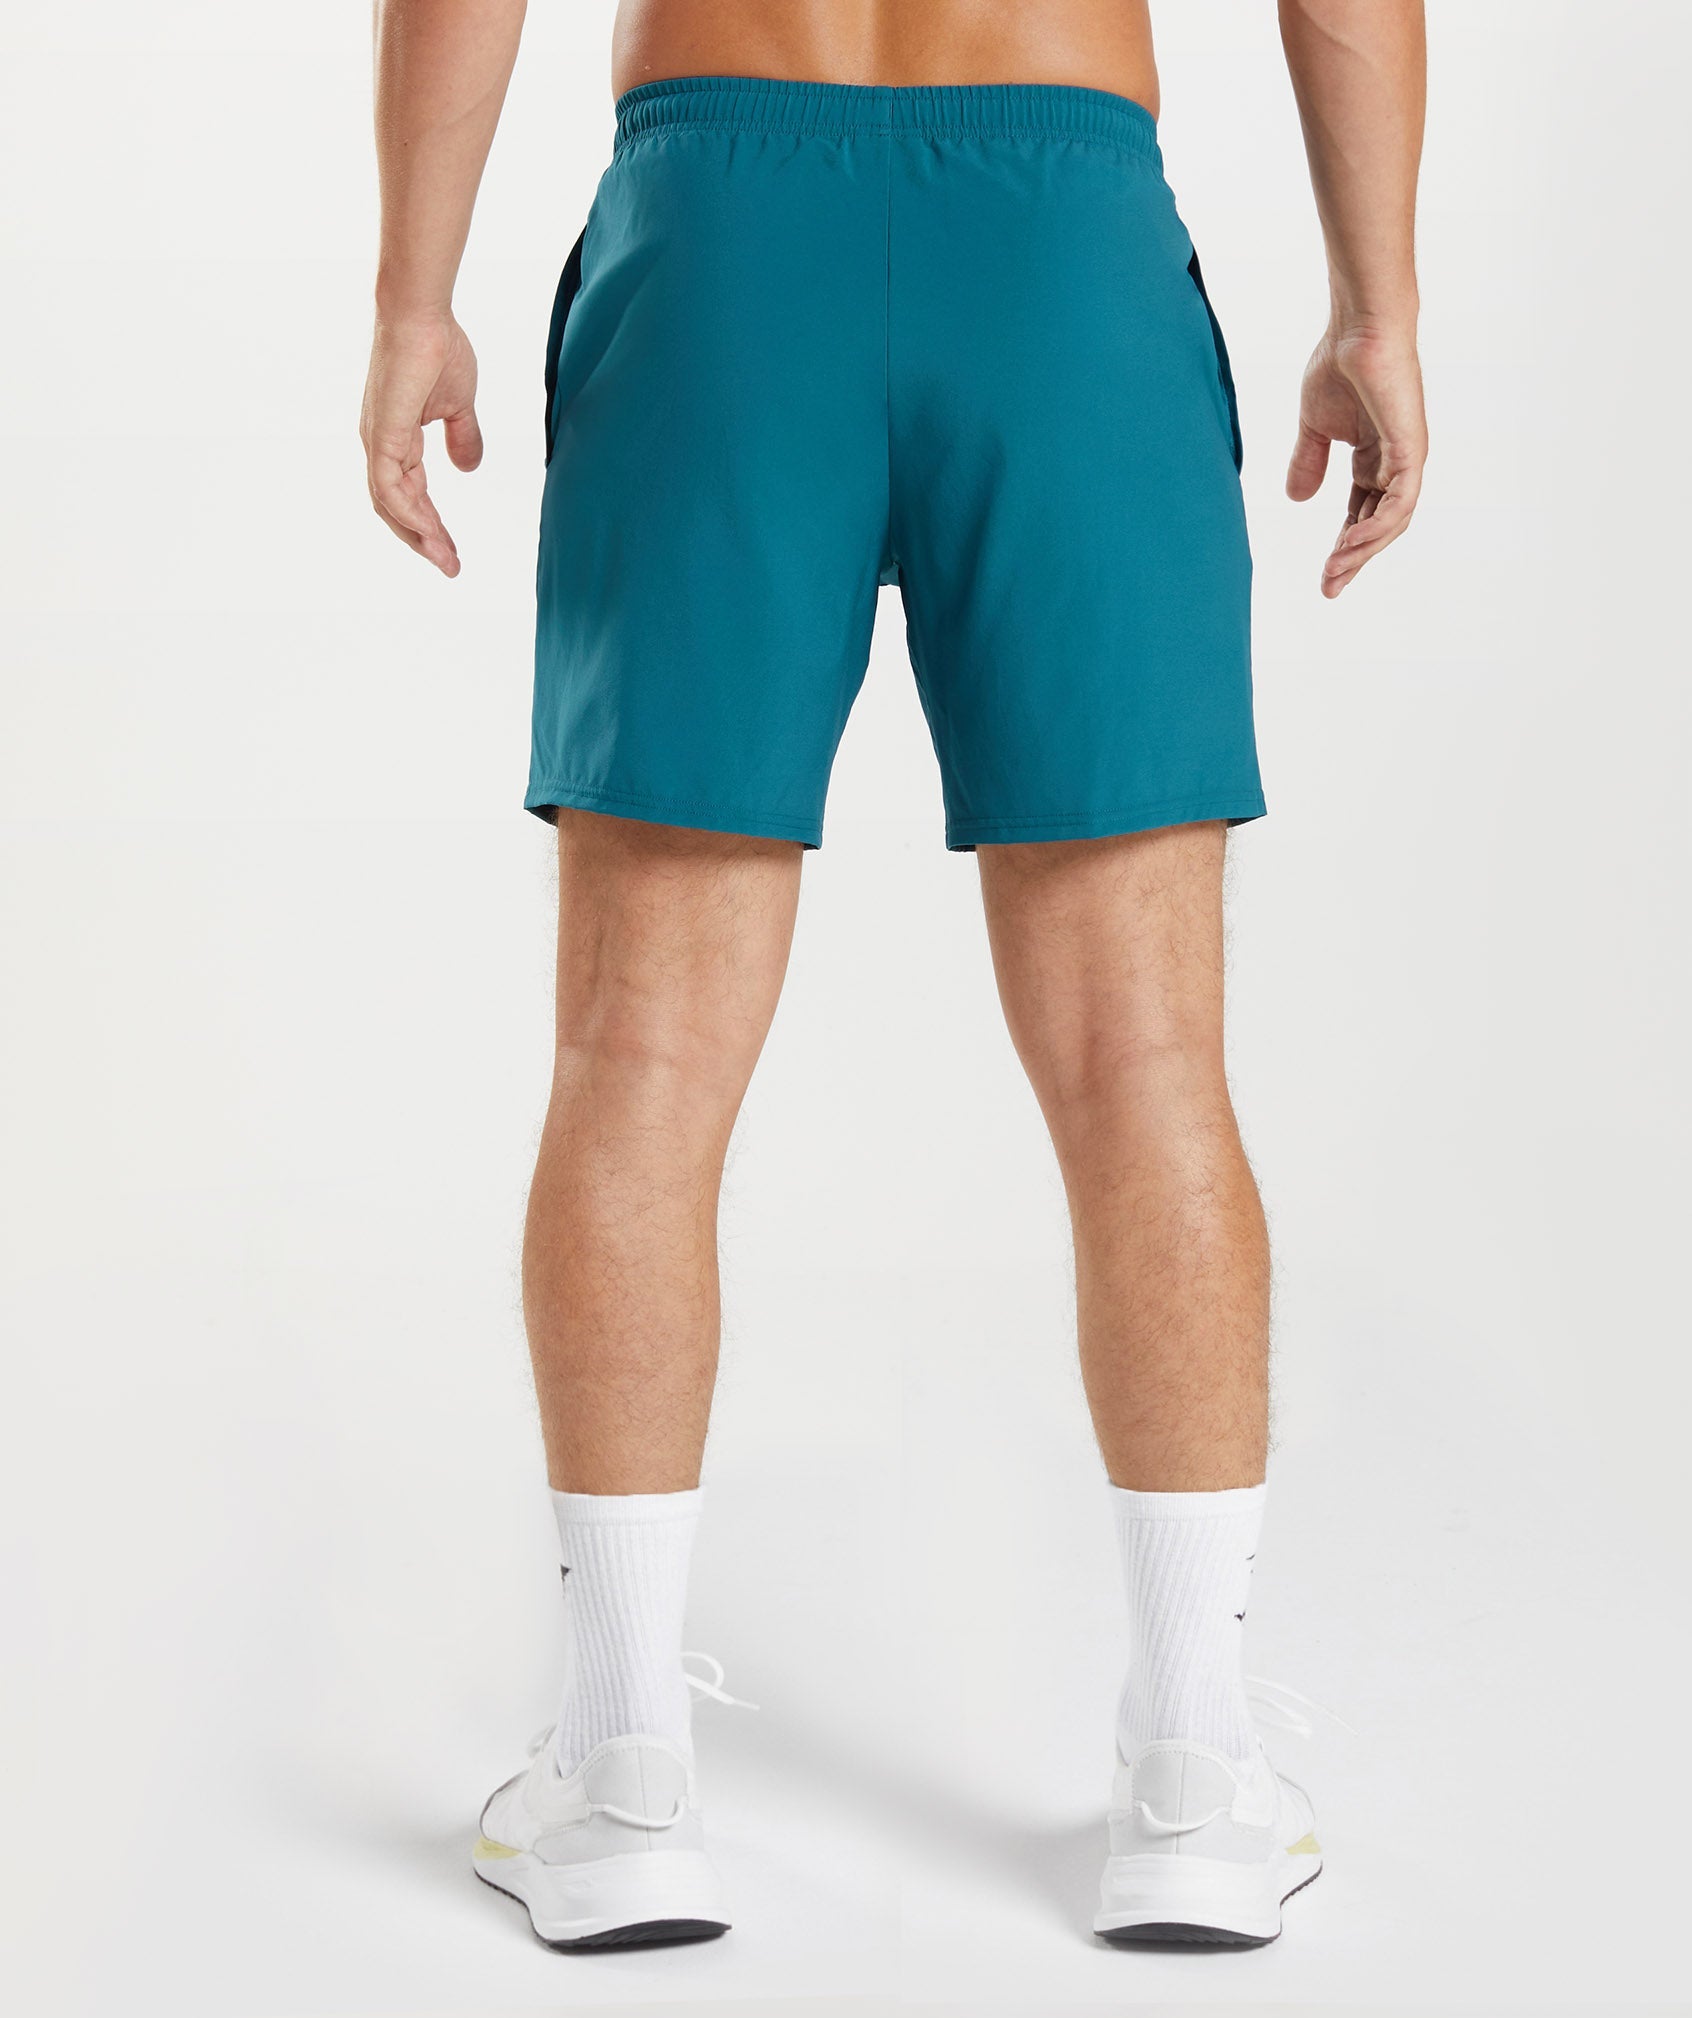 Arrival 7" Shorts in Atlantic Blue - view 2